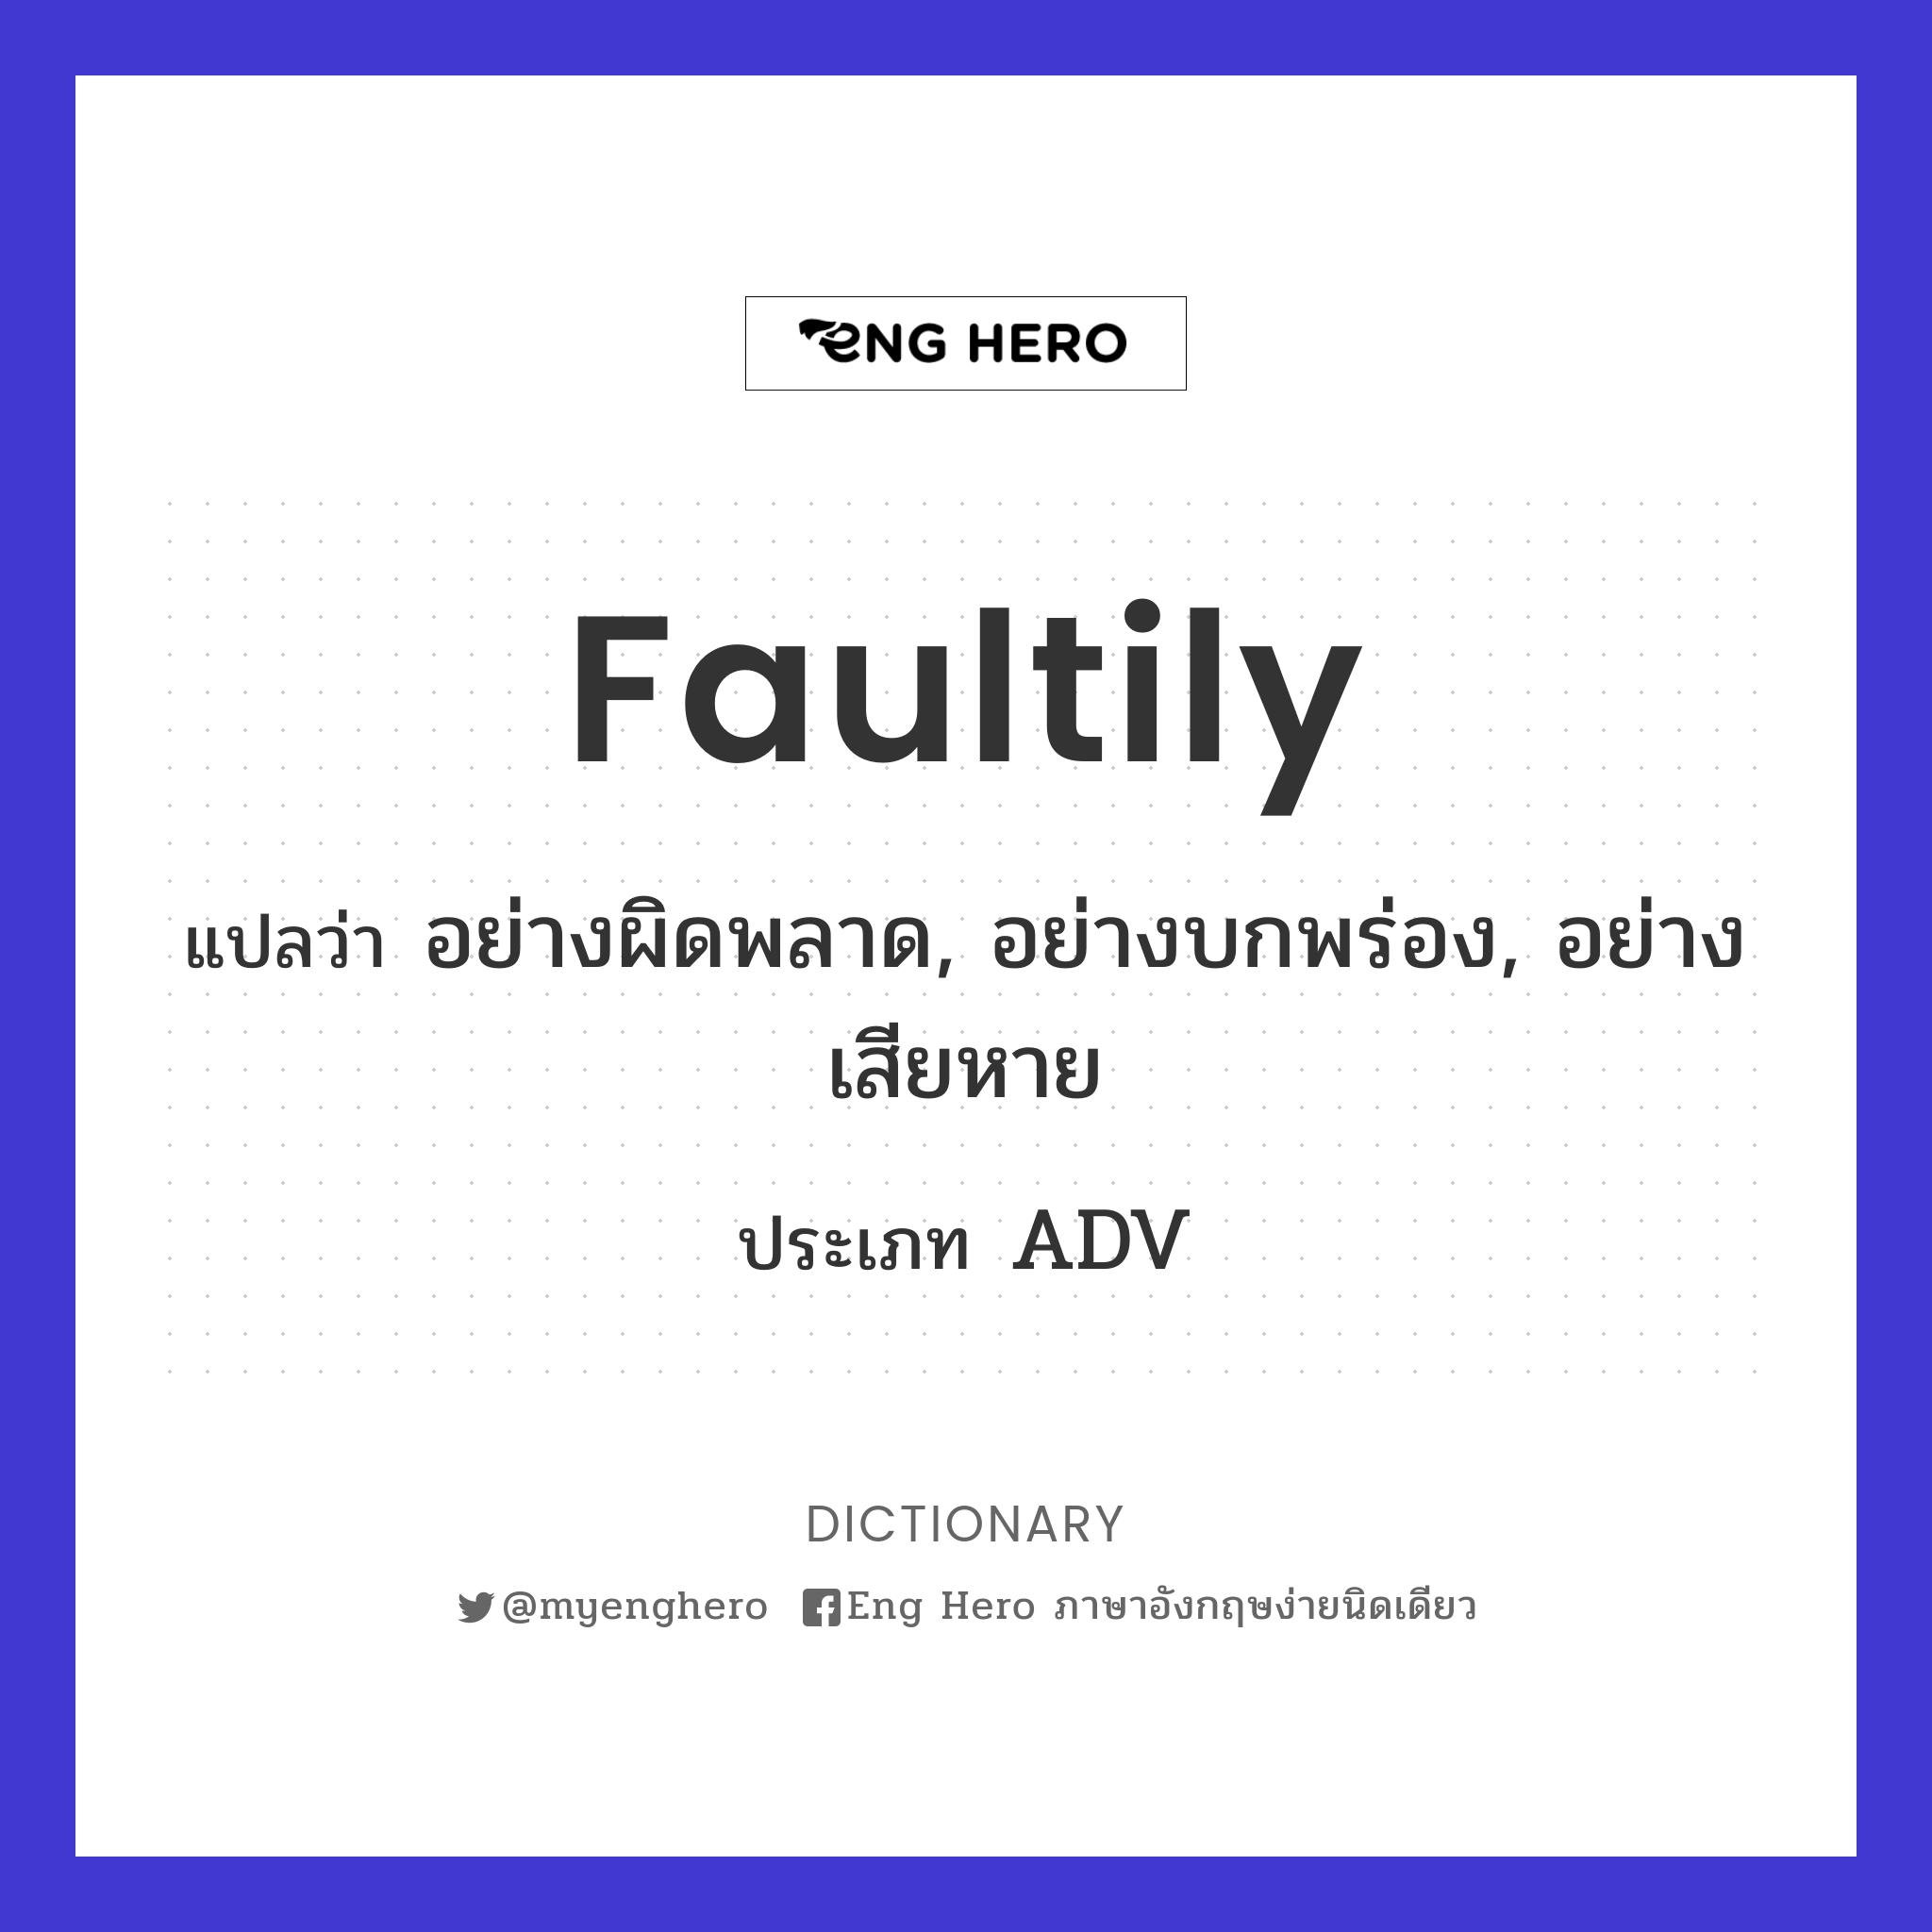 faultily